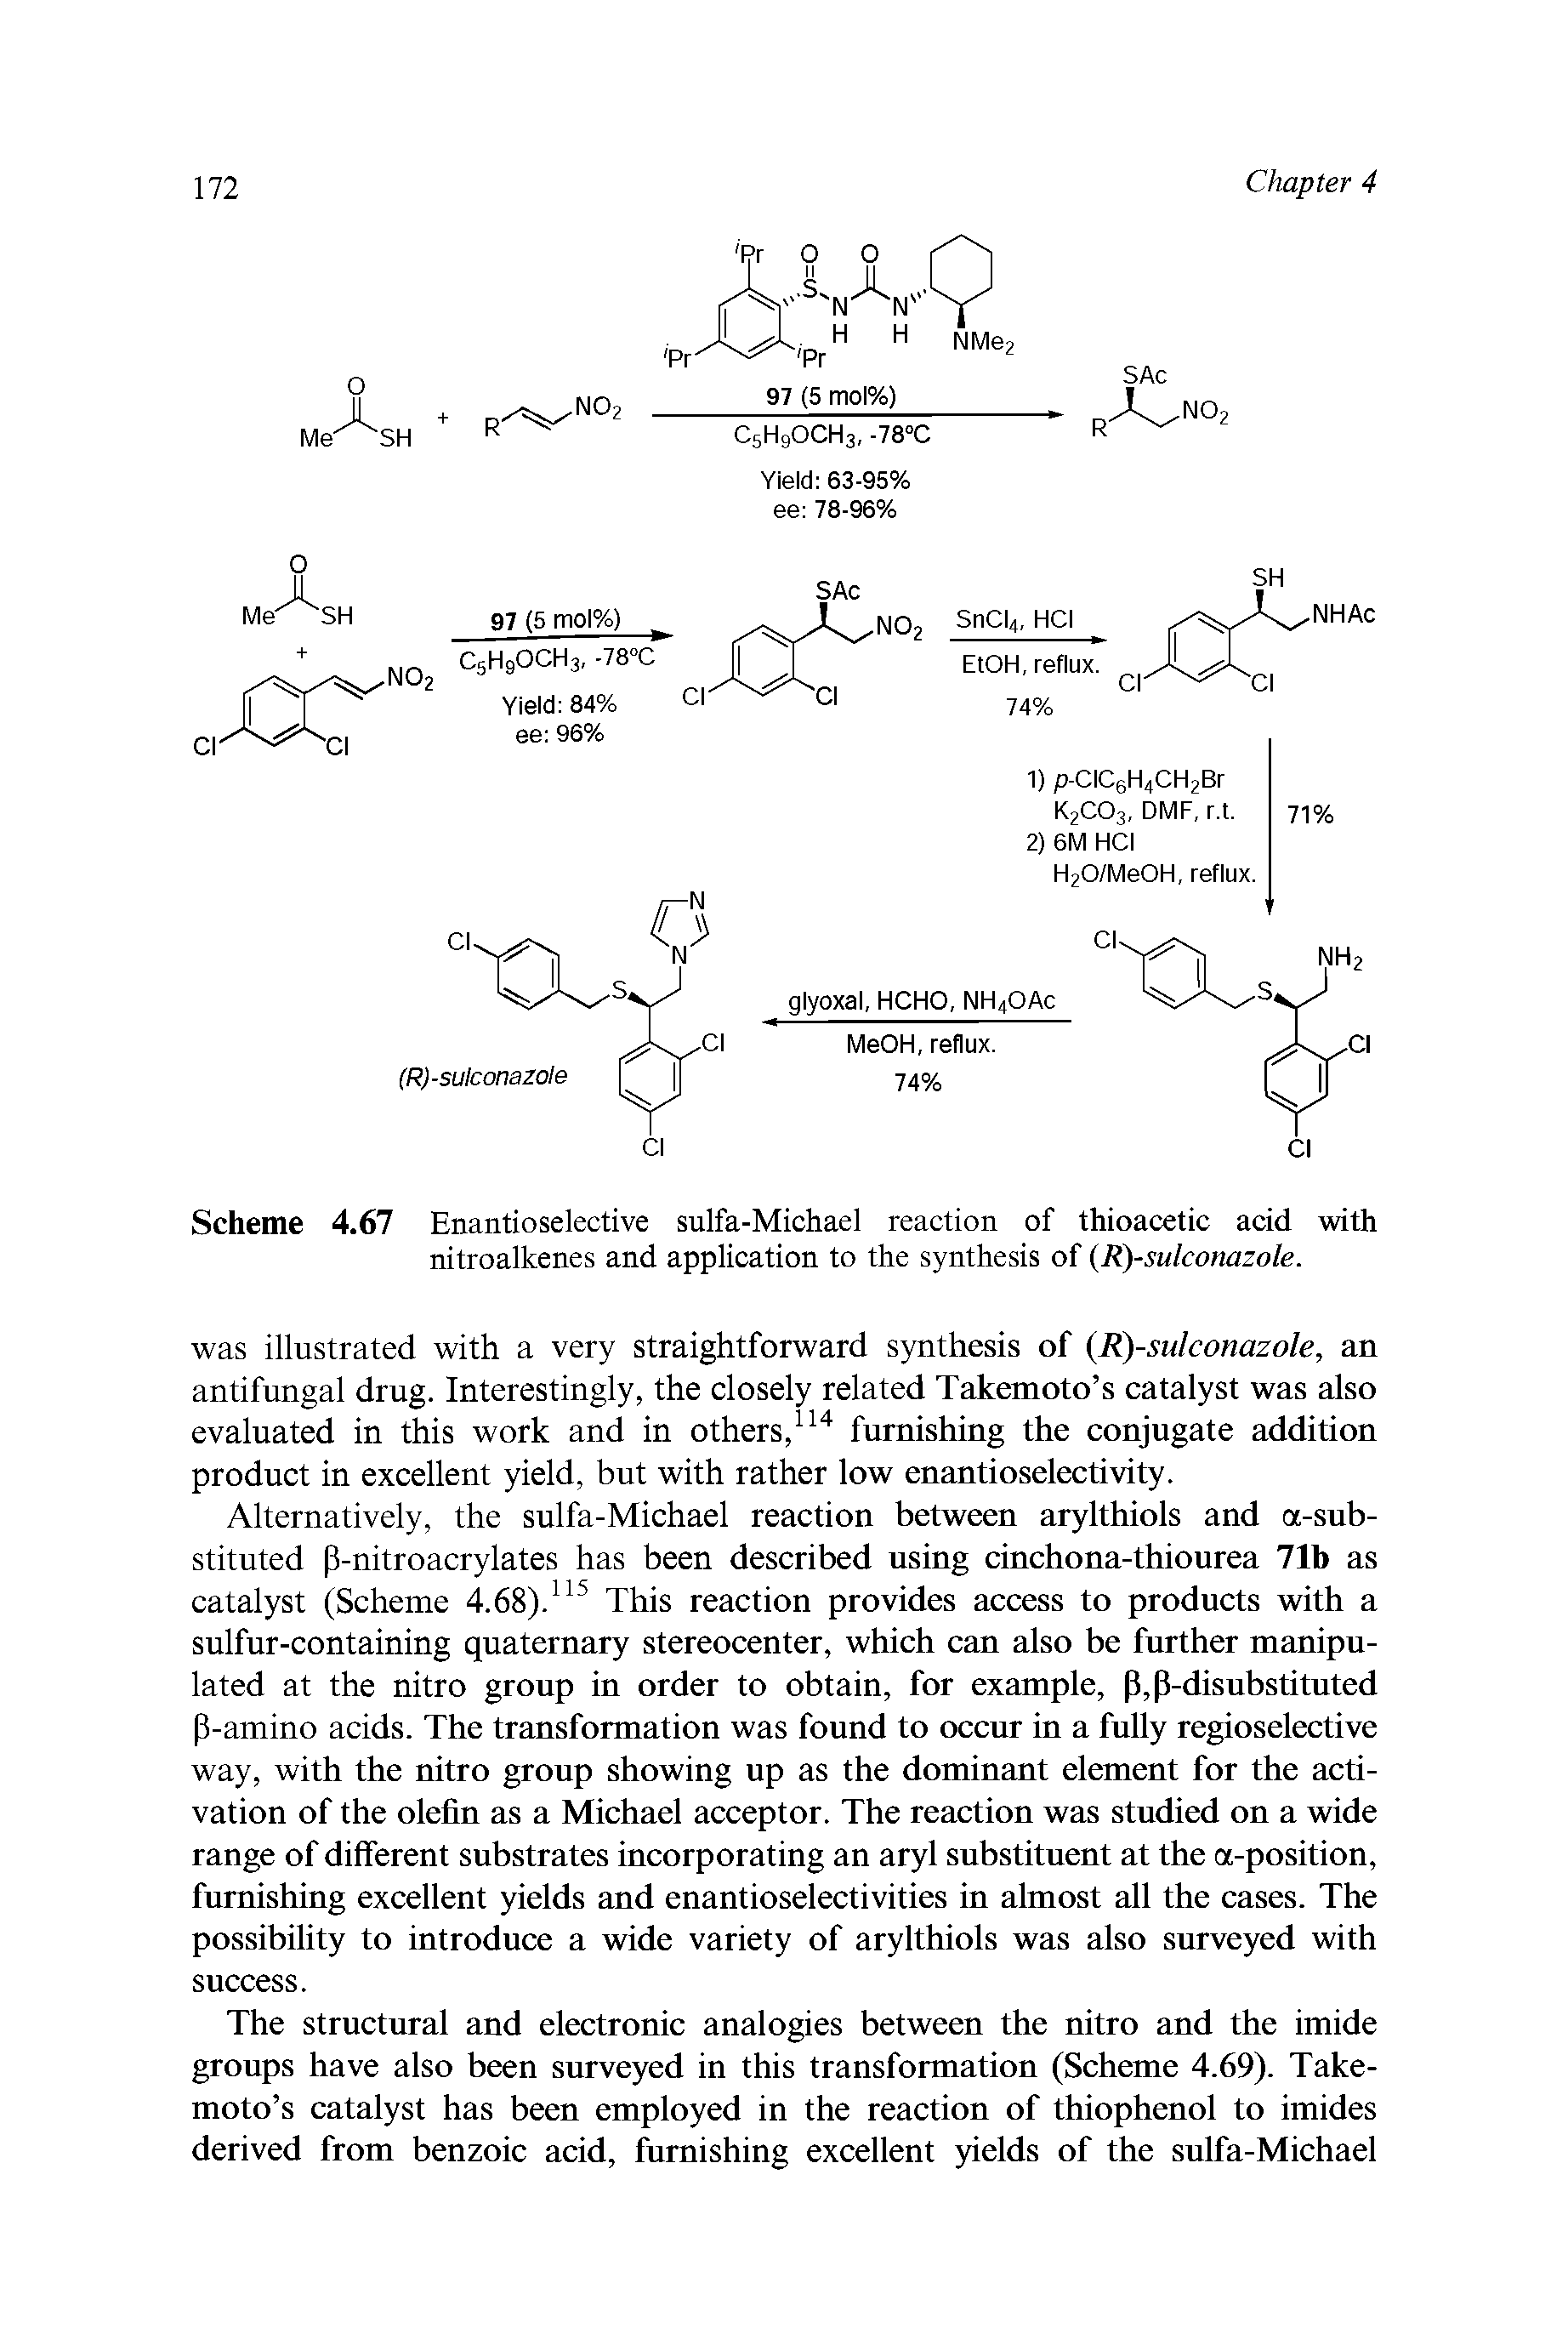 Scheme 4.67 Enantioselective sulfa-Michael reaction of thioacetic acid with nitroalkenes and application to the synthesis of (R)-sulconazote.